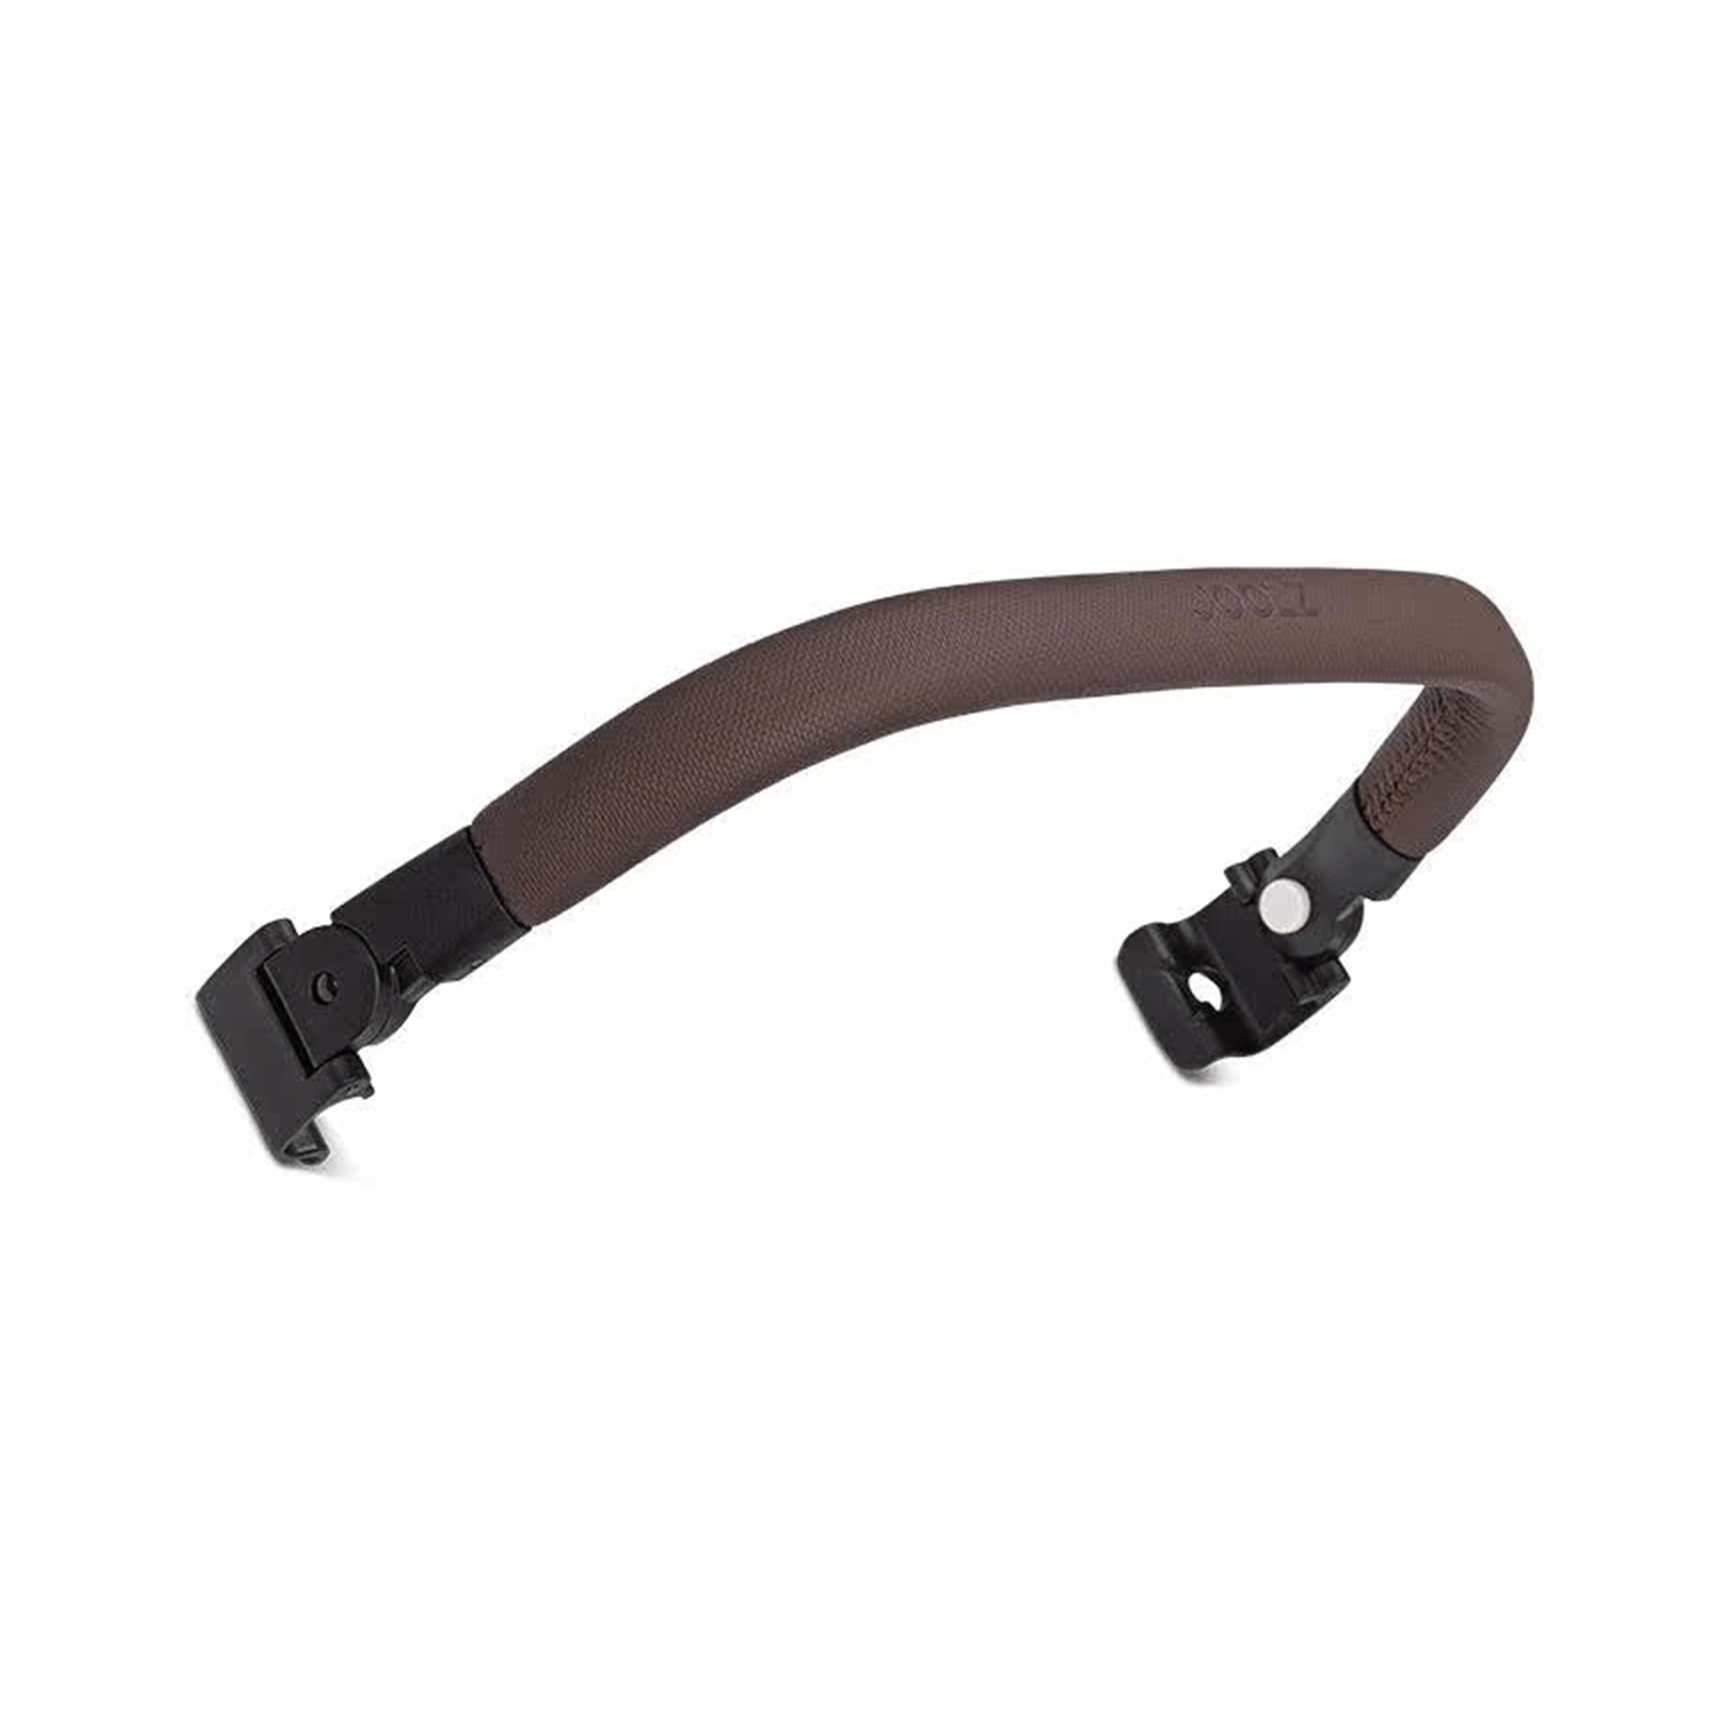 Joolz Aer+ Foldable Bumper Bar in Mid Brown Carbon Buggy Accessories 310132 8715688076743